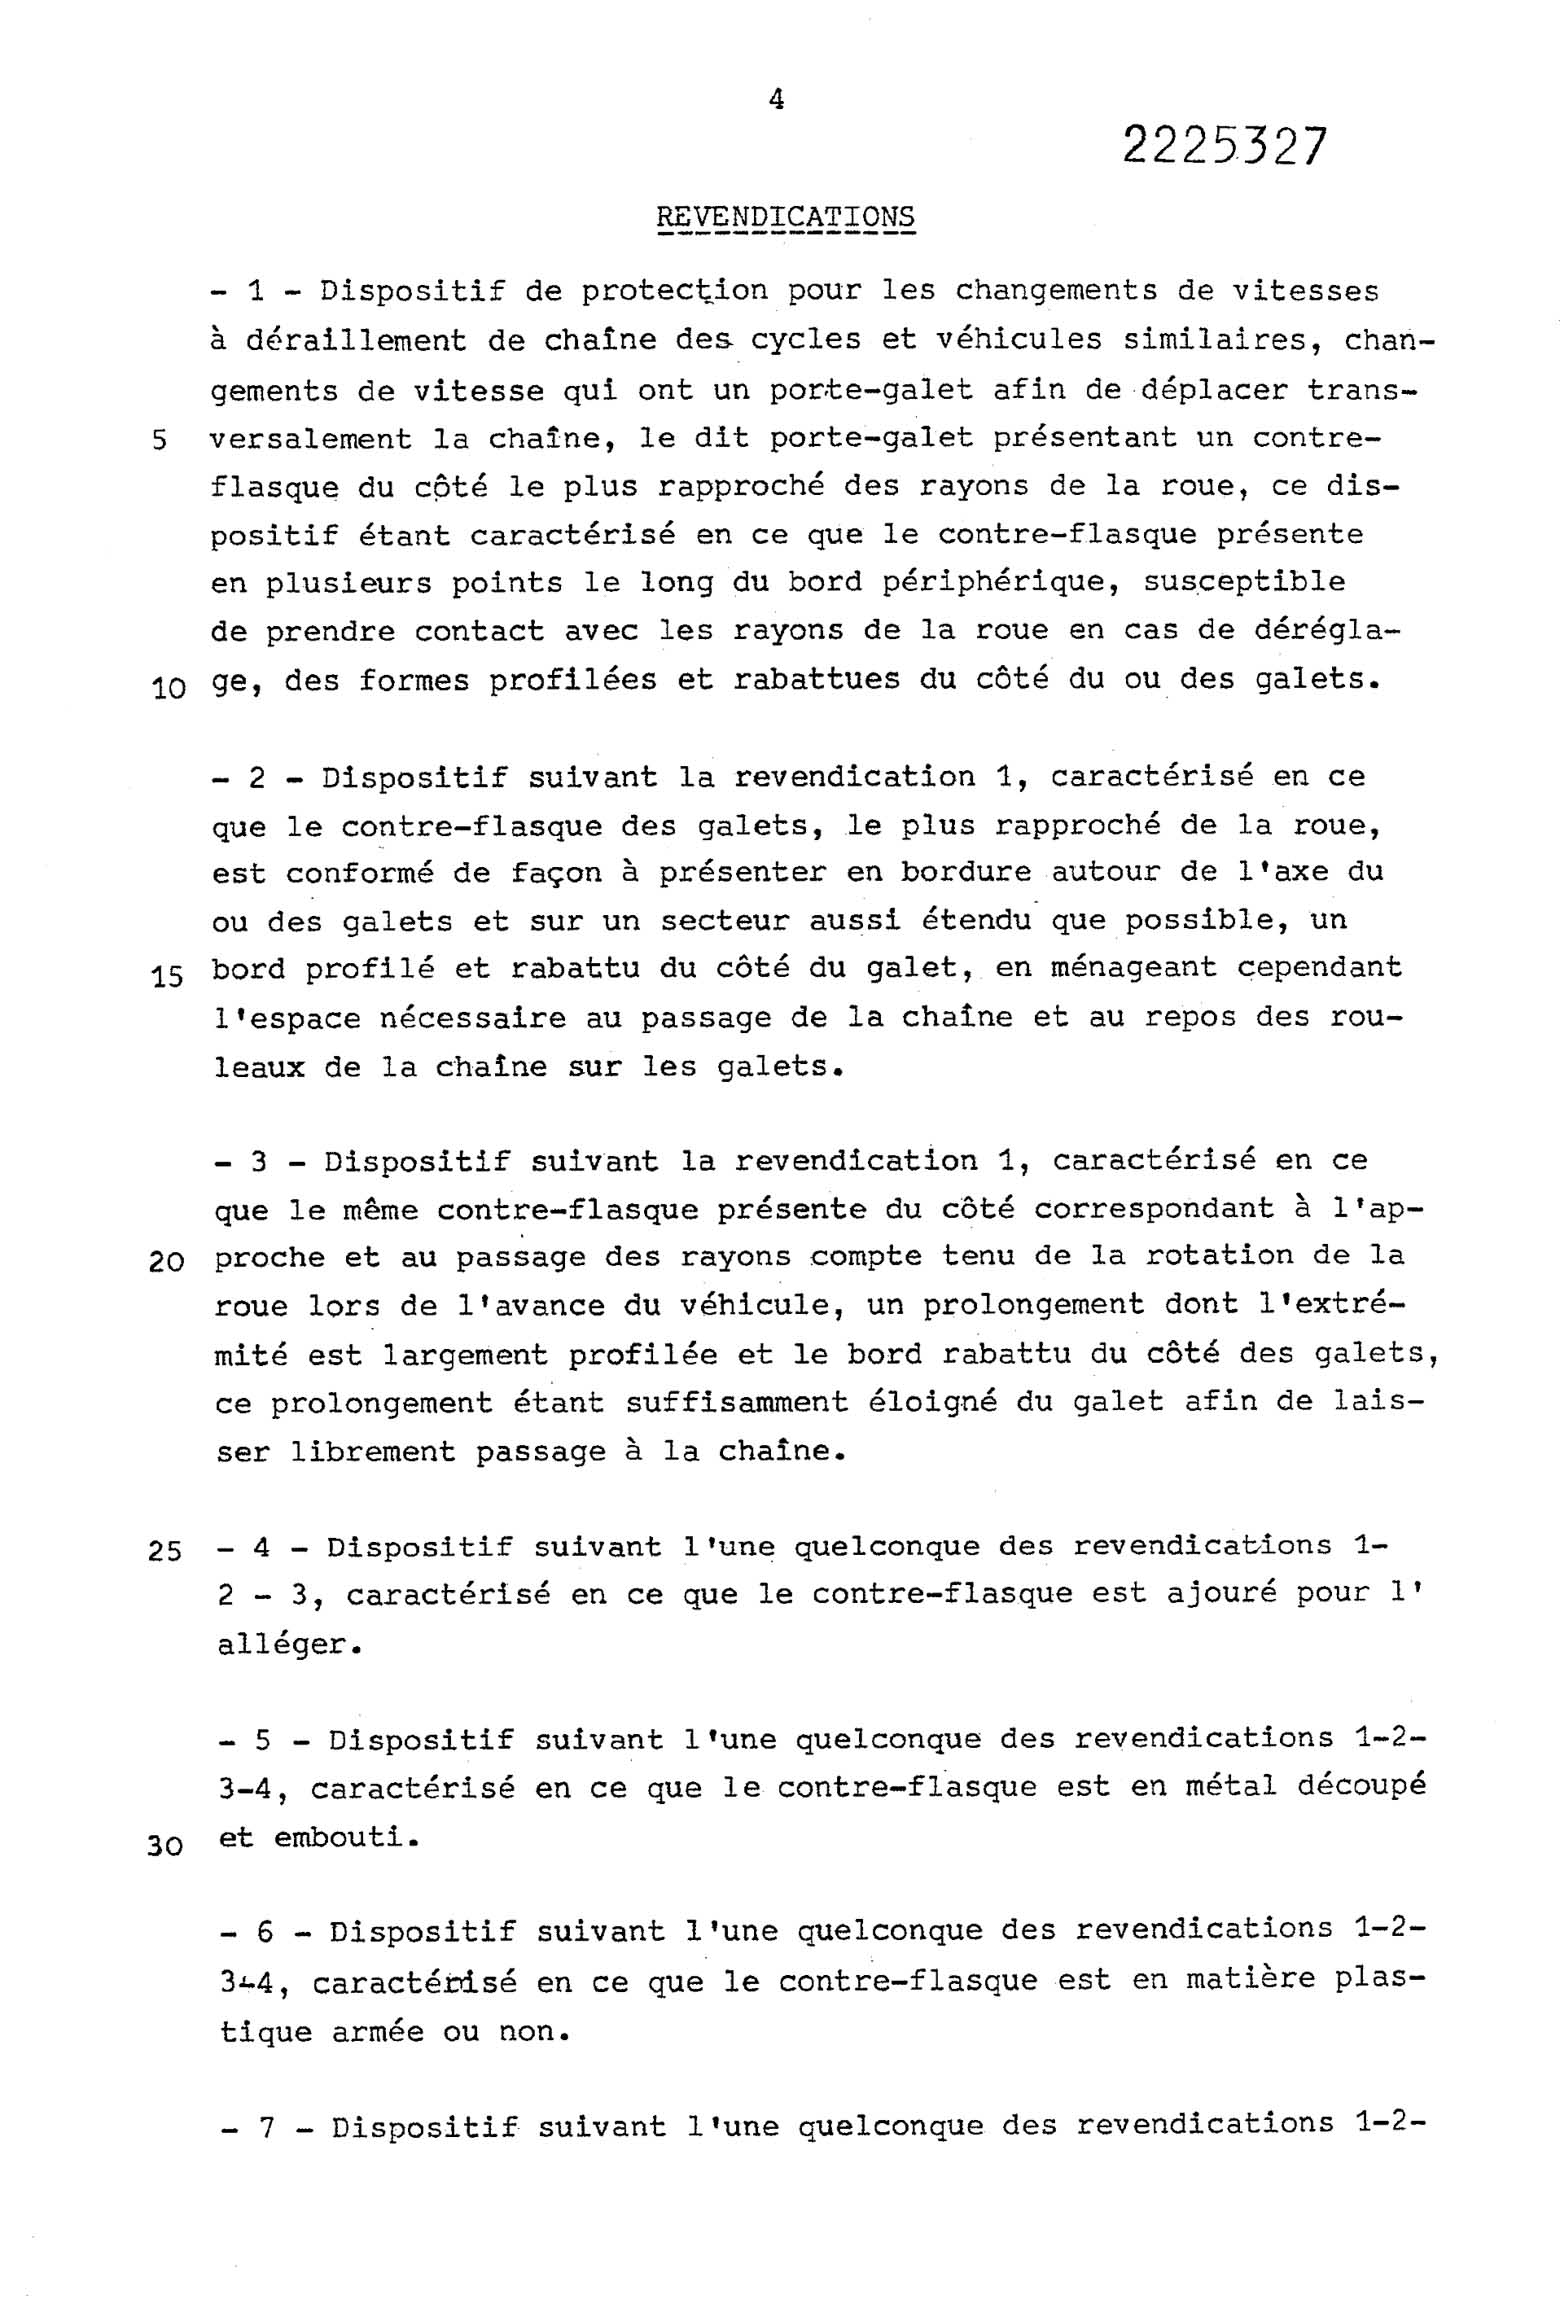 French Patent 2,225,327 - Simplex scan 005 main image